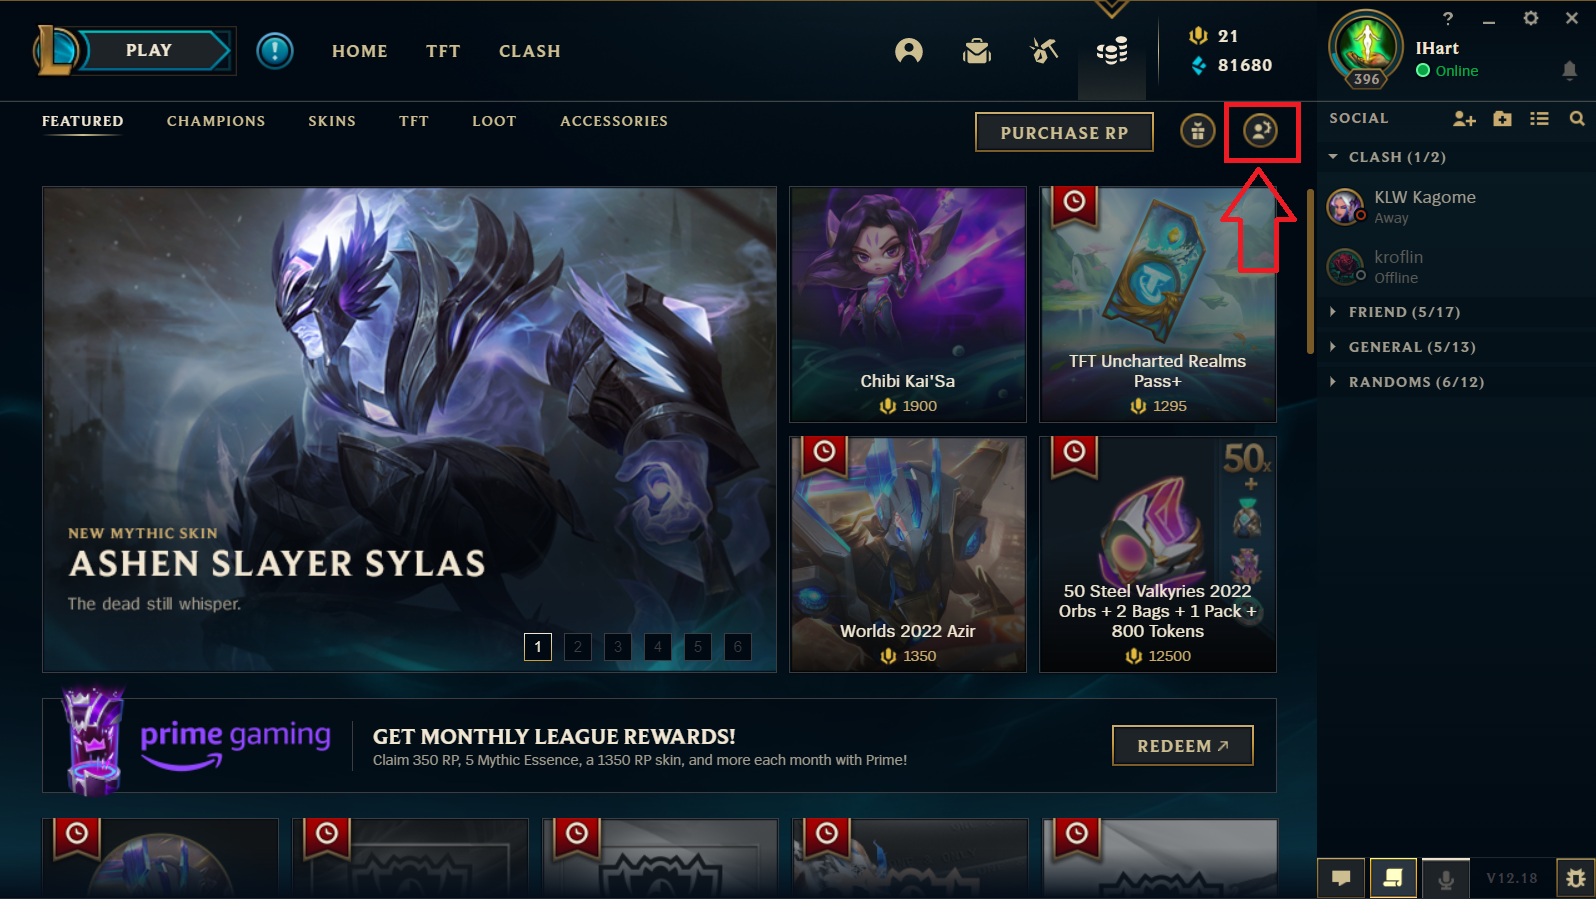 How To Check Your League of Legends Purchase History